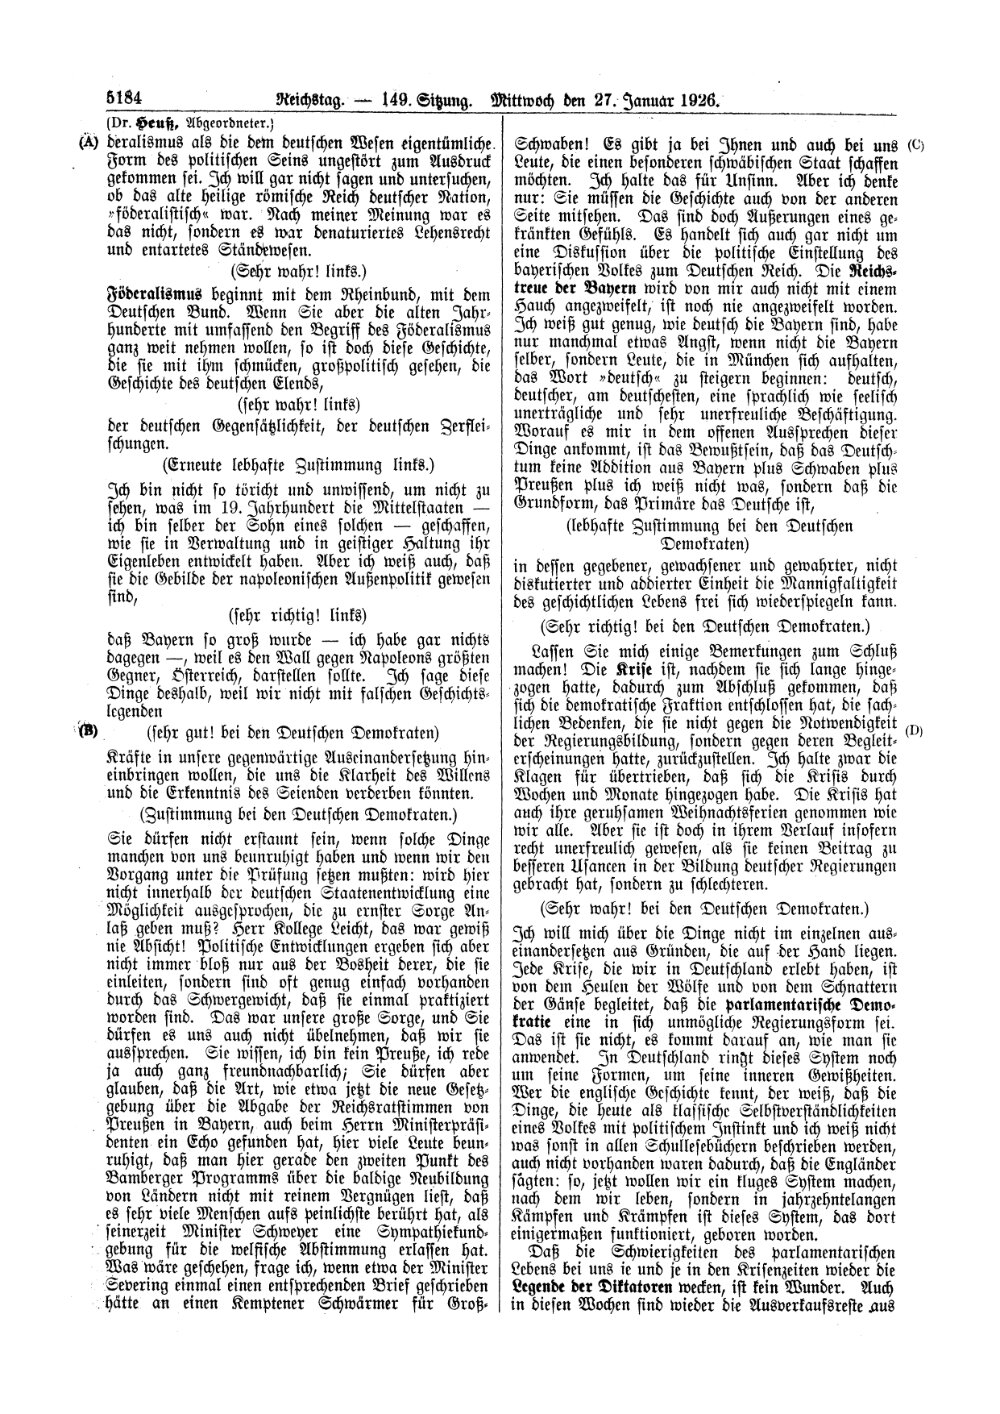 Scan of page 5184